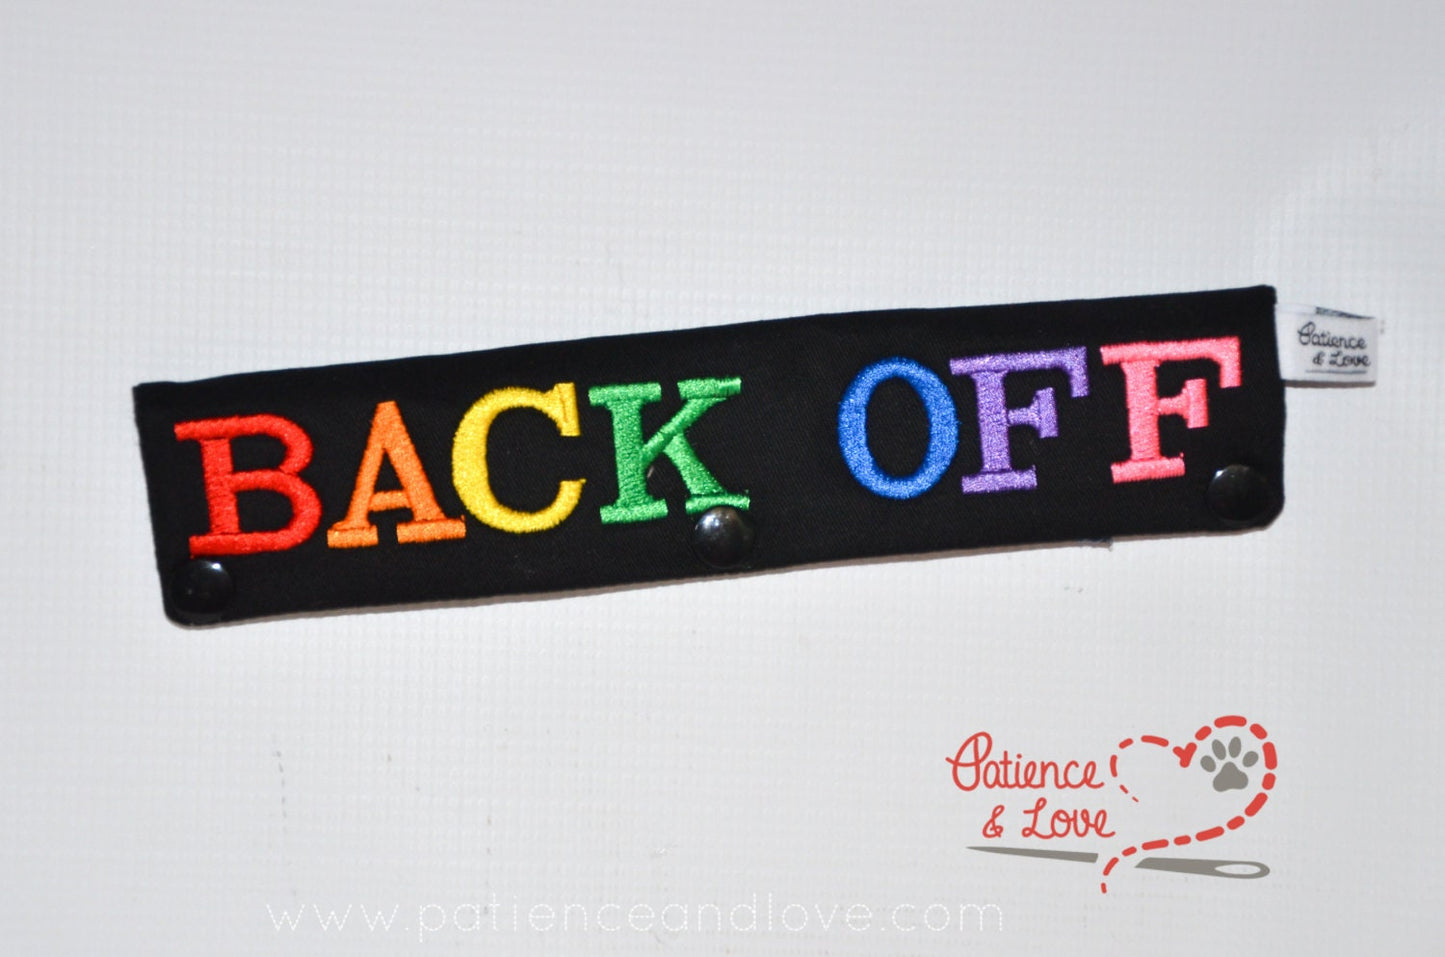 One Leash Sleeve embroidered with the following on both sides of the sleeve       Back Off with rainbow text   As seen in the listing photo.   Listing photo shows black fabric with rainbow text.